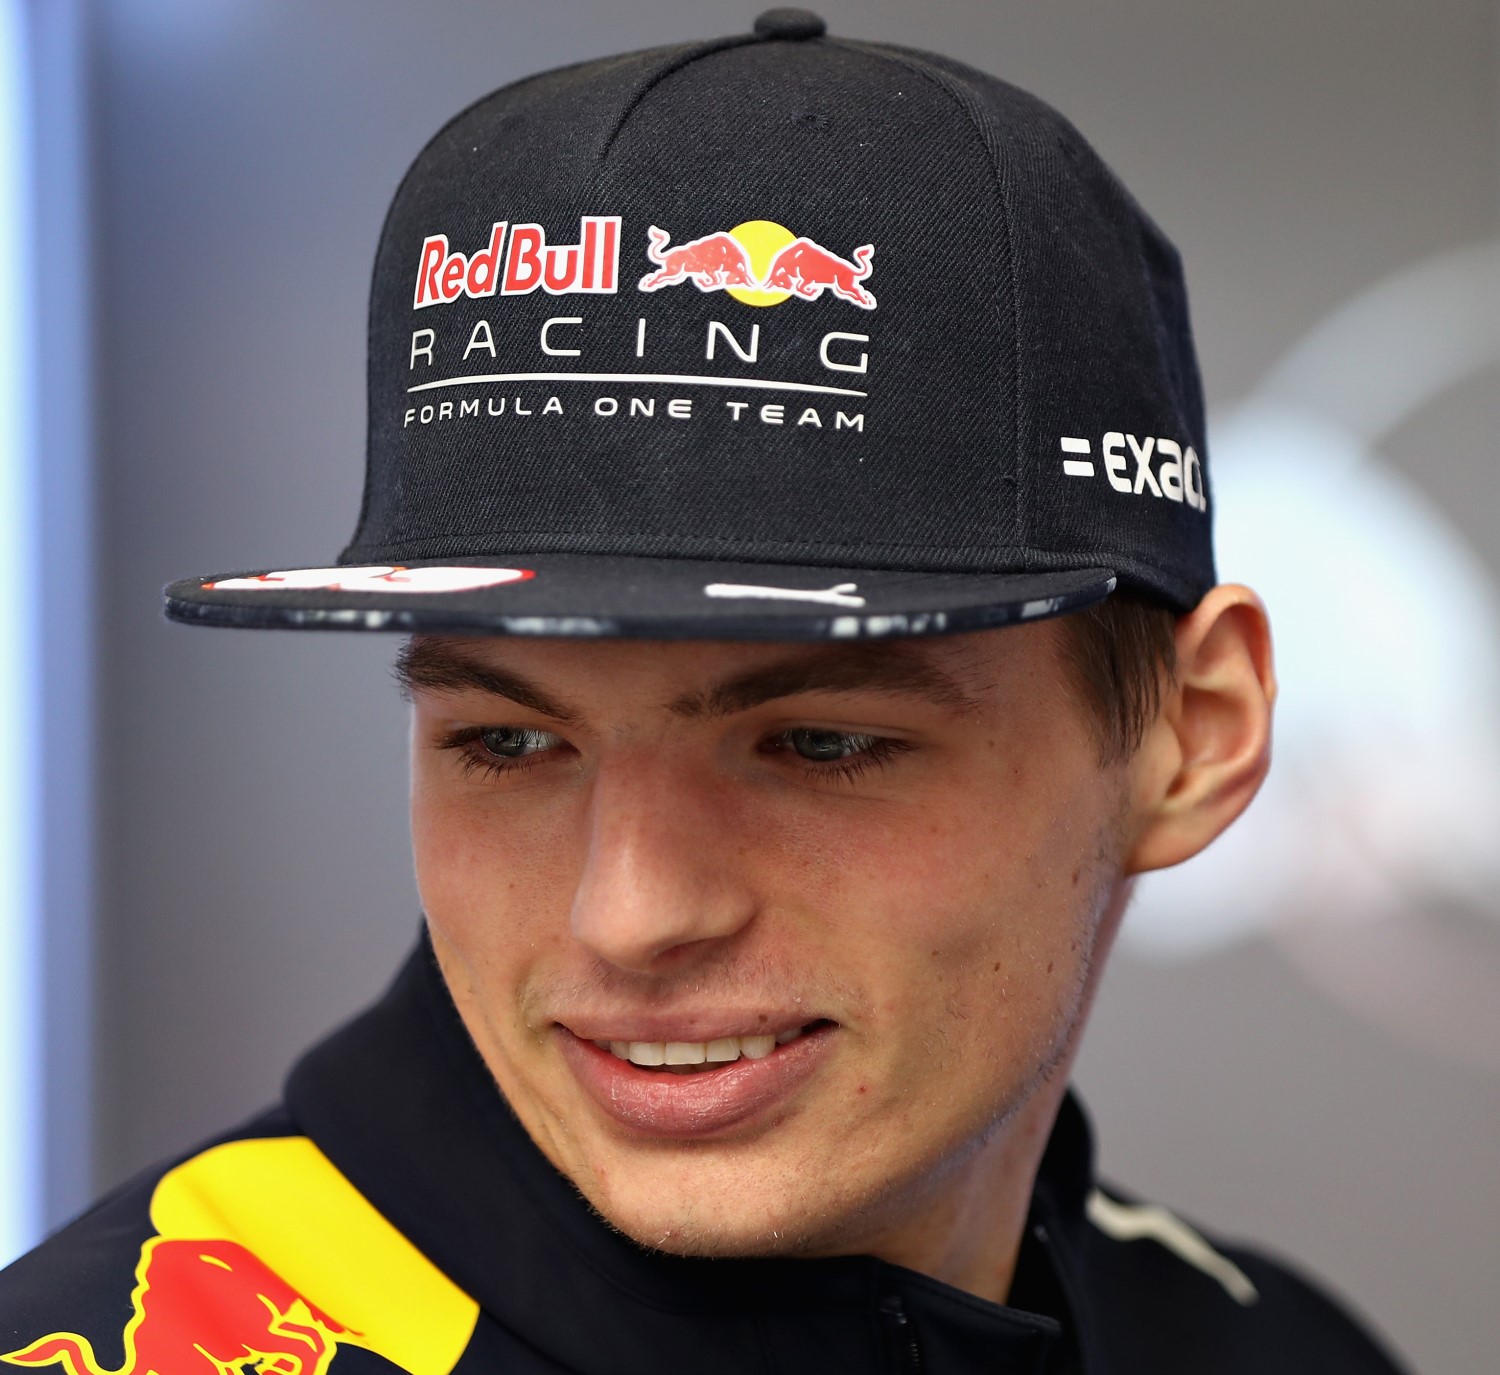 Verstappen learns that F1 is 99% car and 1% driver